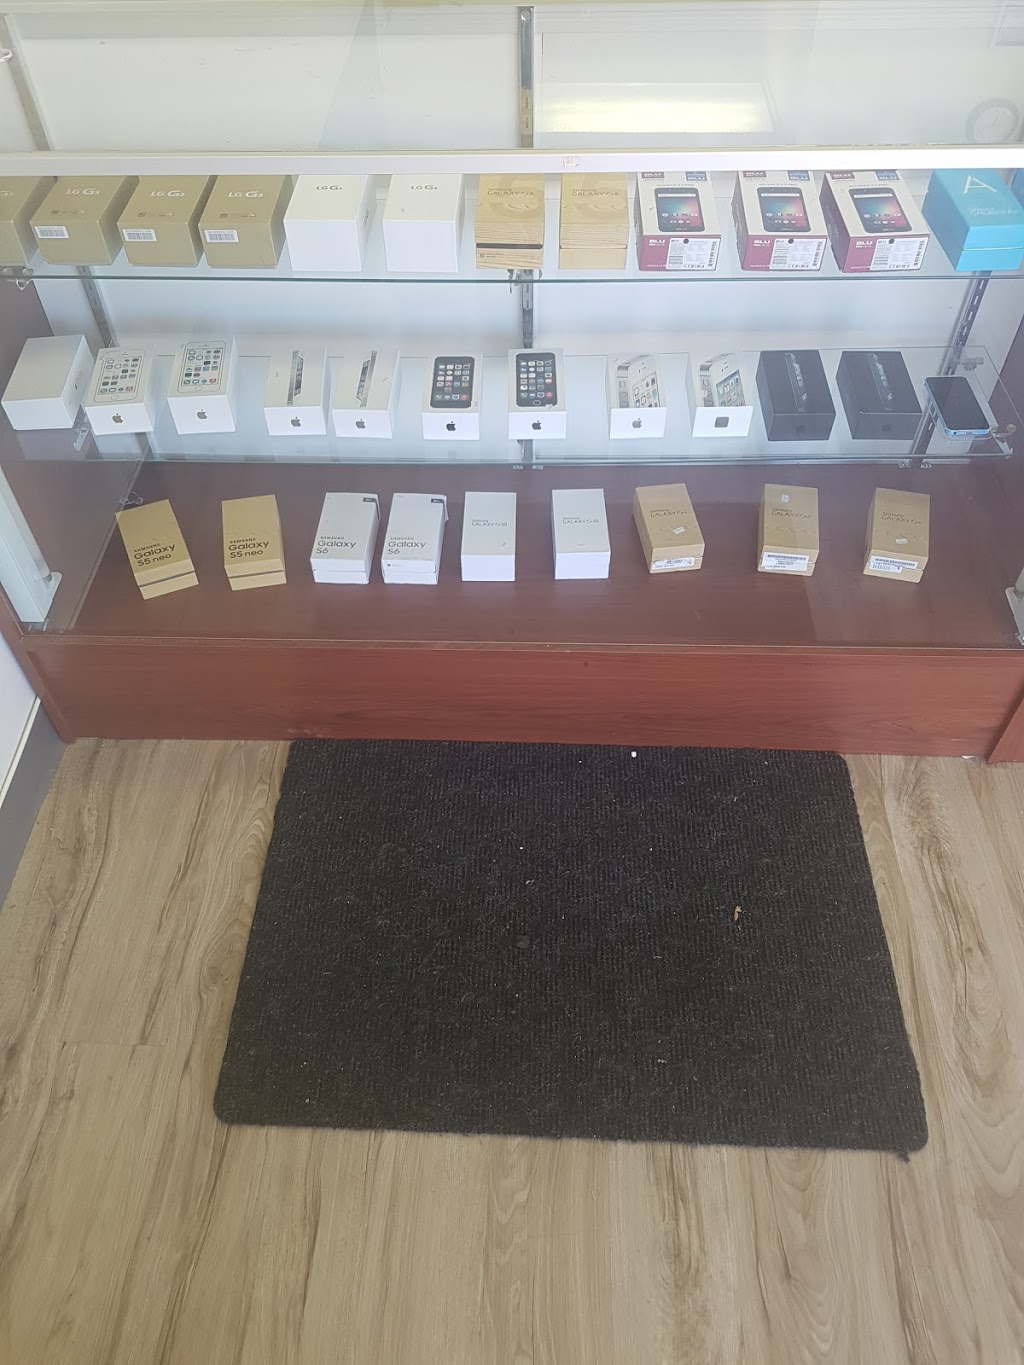 The Cell Shoppe | electronics store | 6102 172 St NW, Edmonton, AB T6M 1G9, Canada | 5878096029 OR +1 587-809-6029